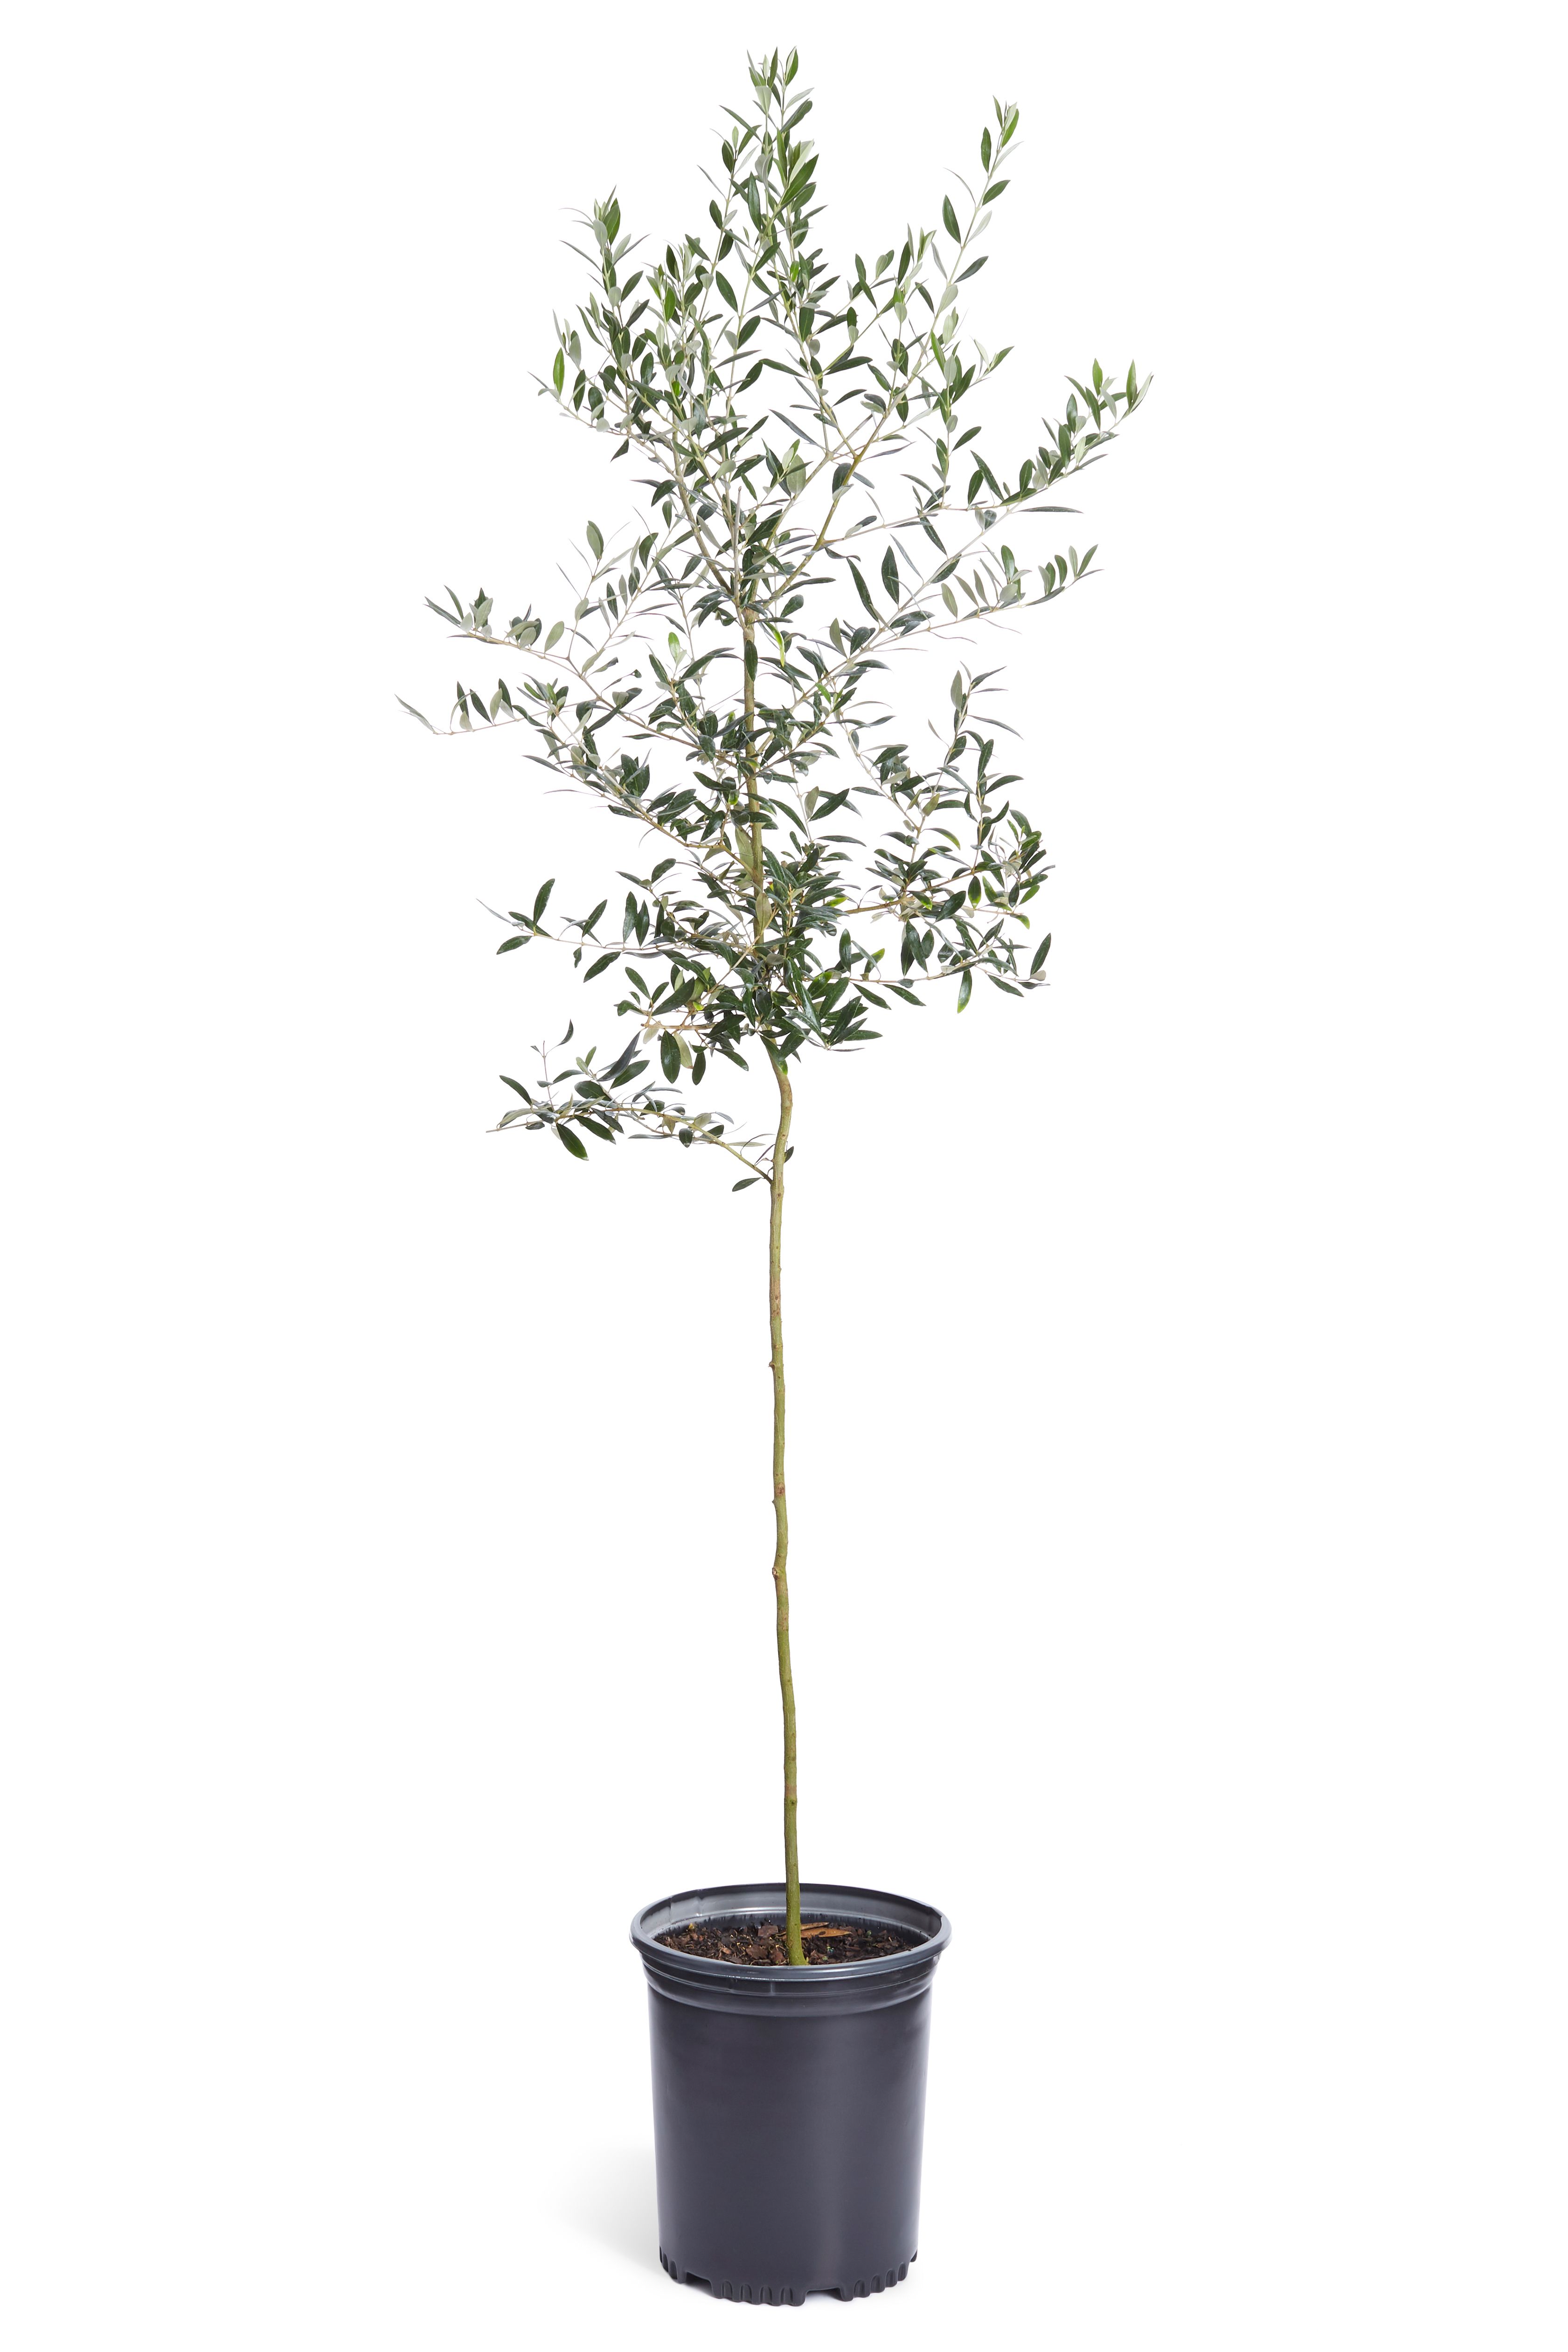 Arbequina Olive Tree - Grow Your Own Delicious Olives - Cannot Ship to AZ | Walmart (US)